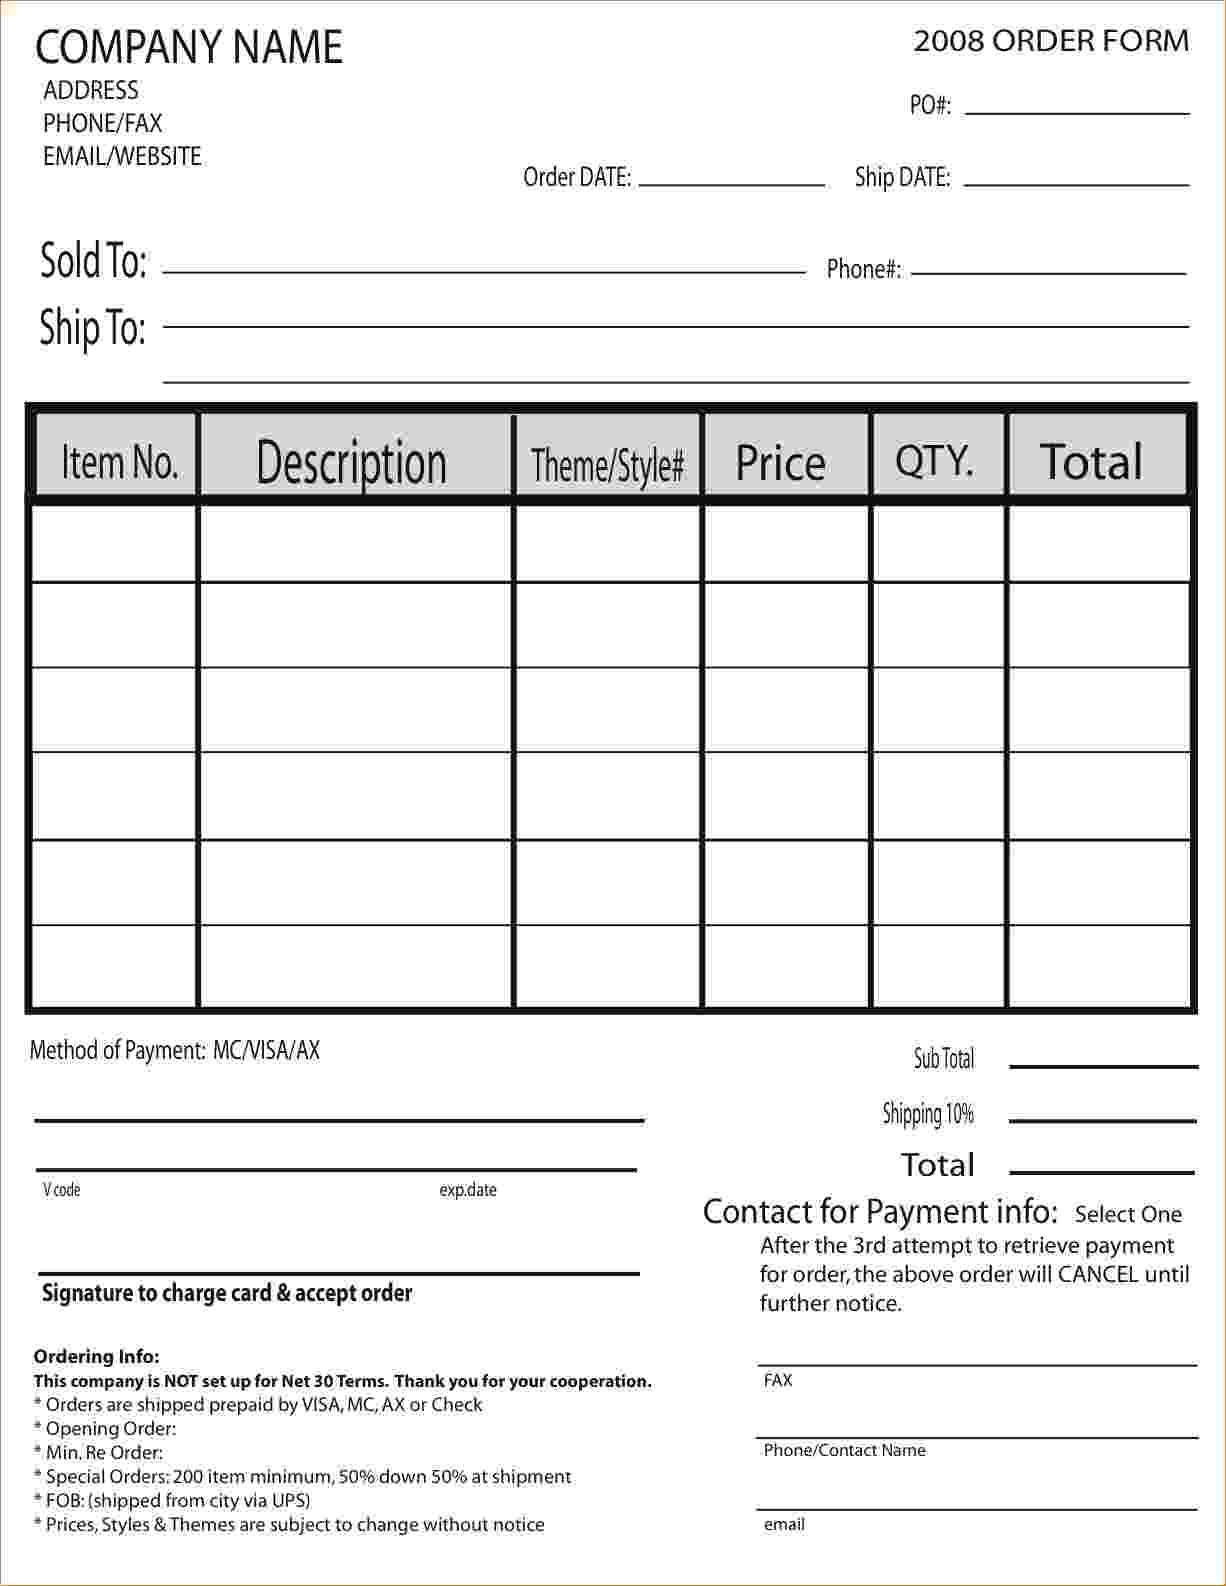 sample of order forms   Boat.jeremyeaton.co